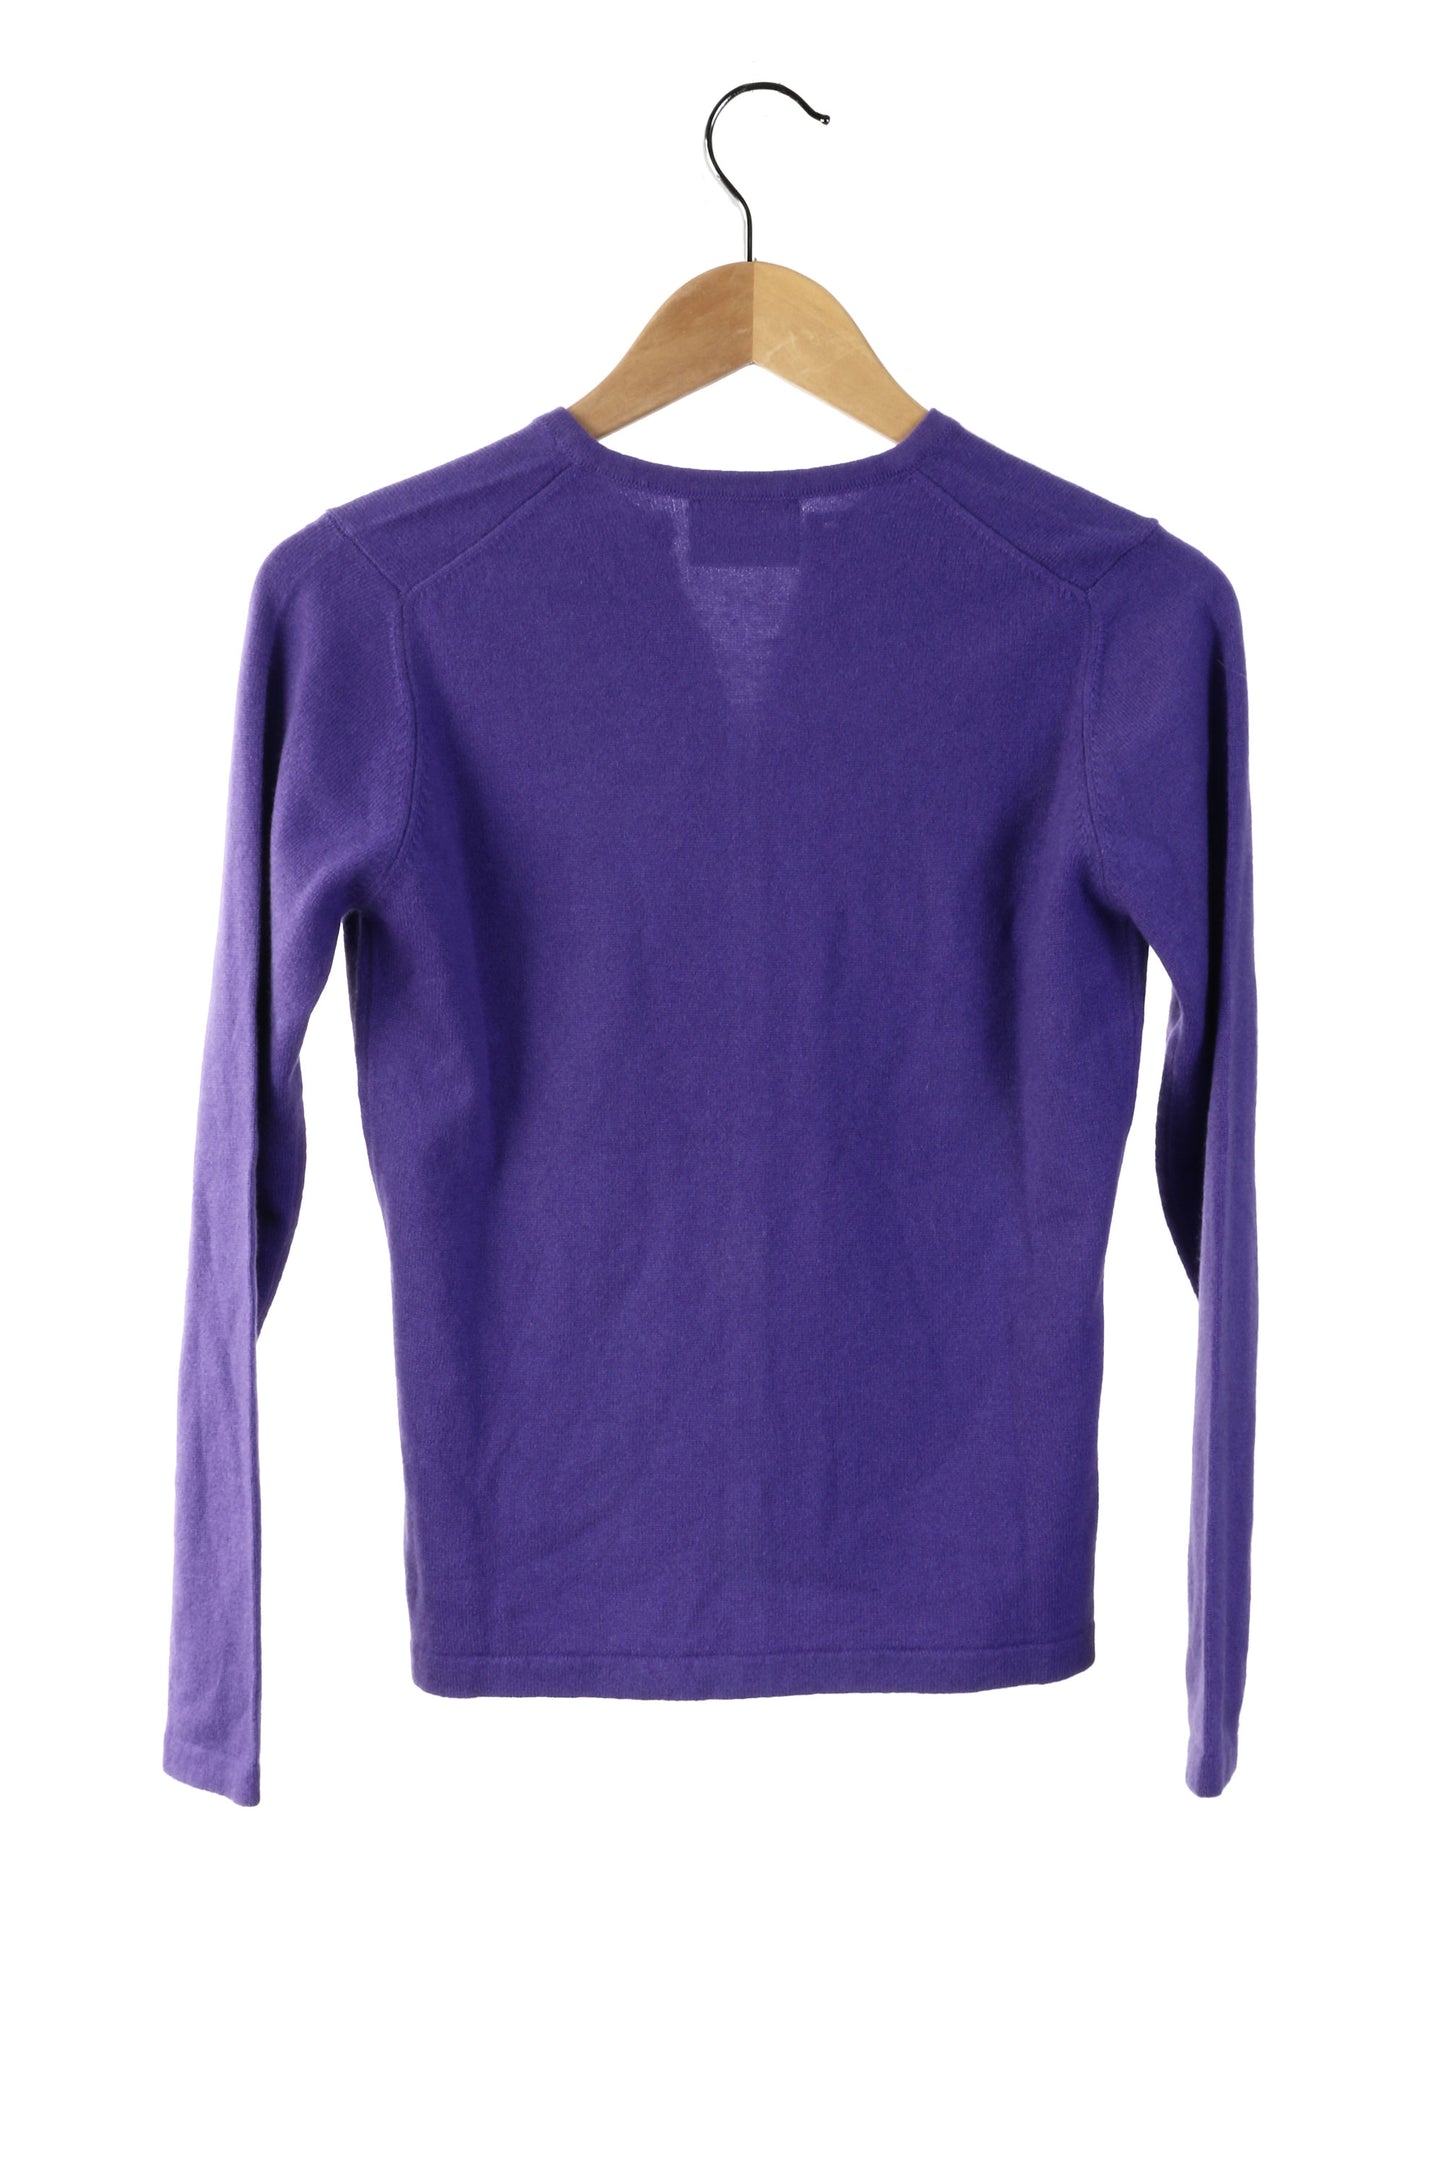 100% Cashmere Violet Cardigan Small